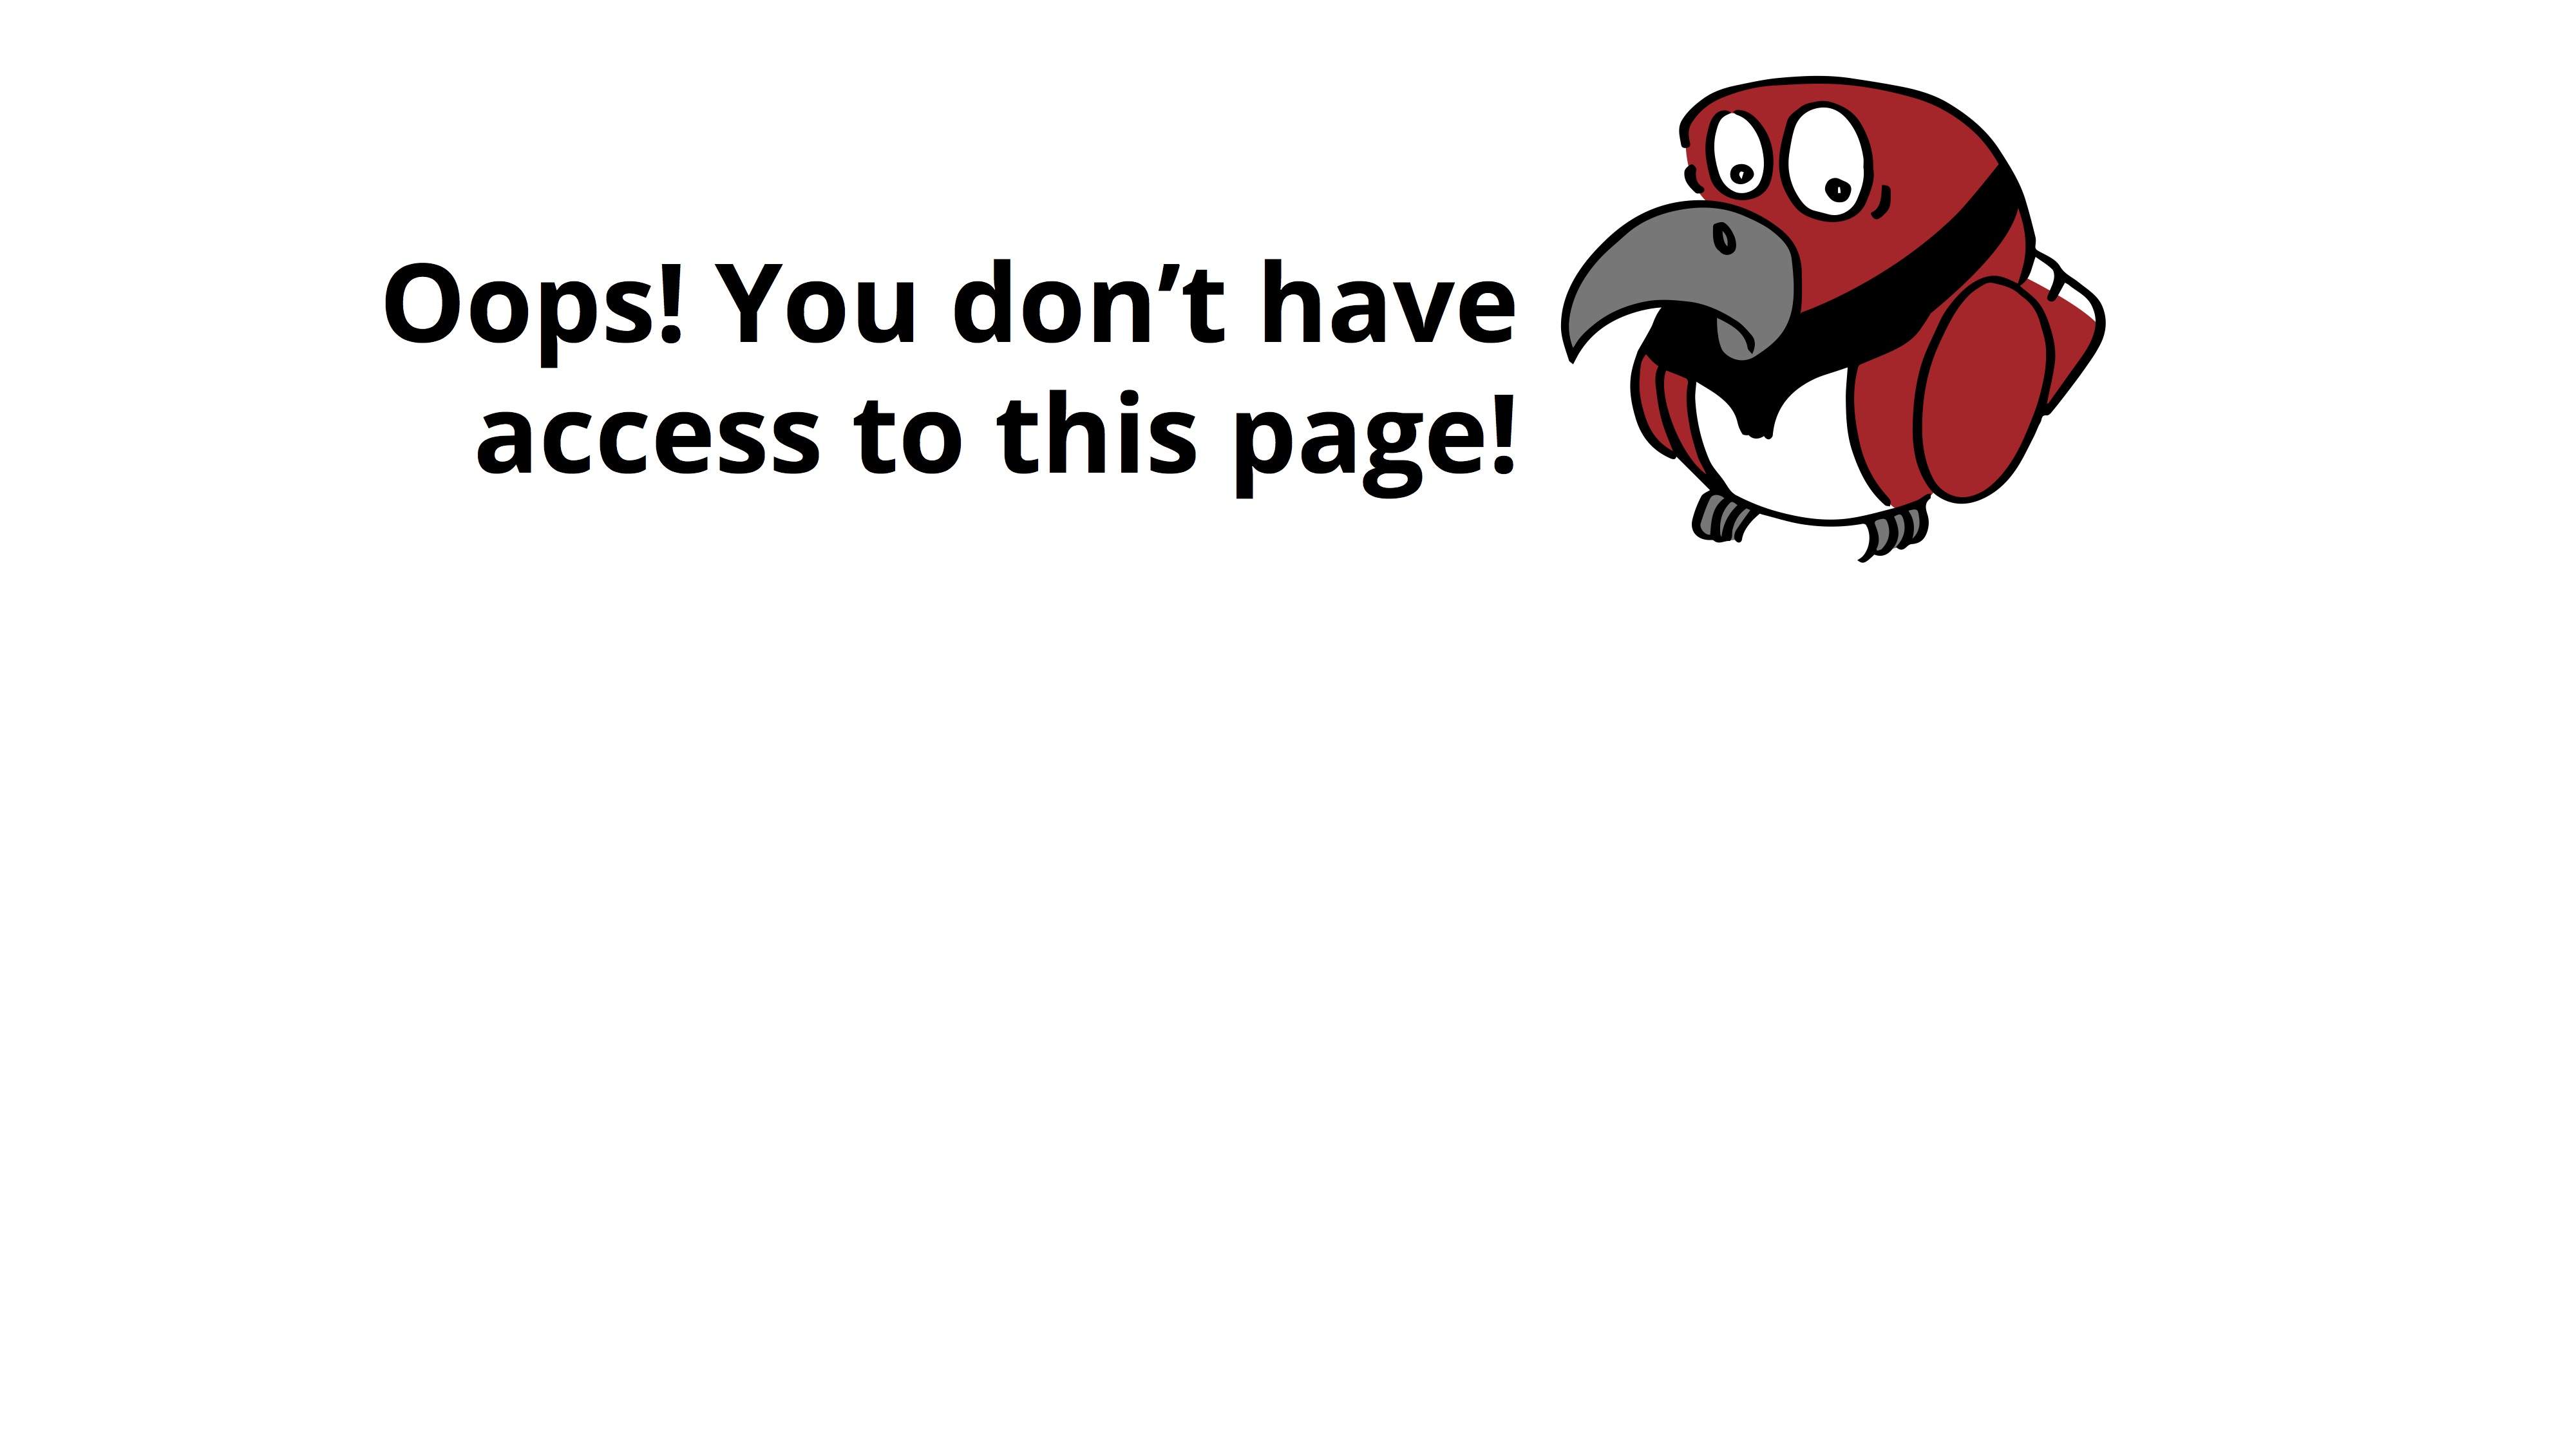 Oops! You don't have access to this page!